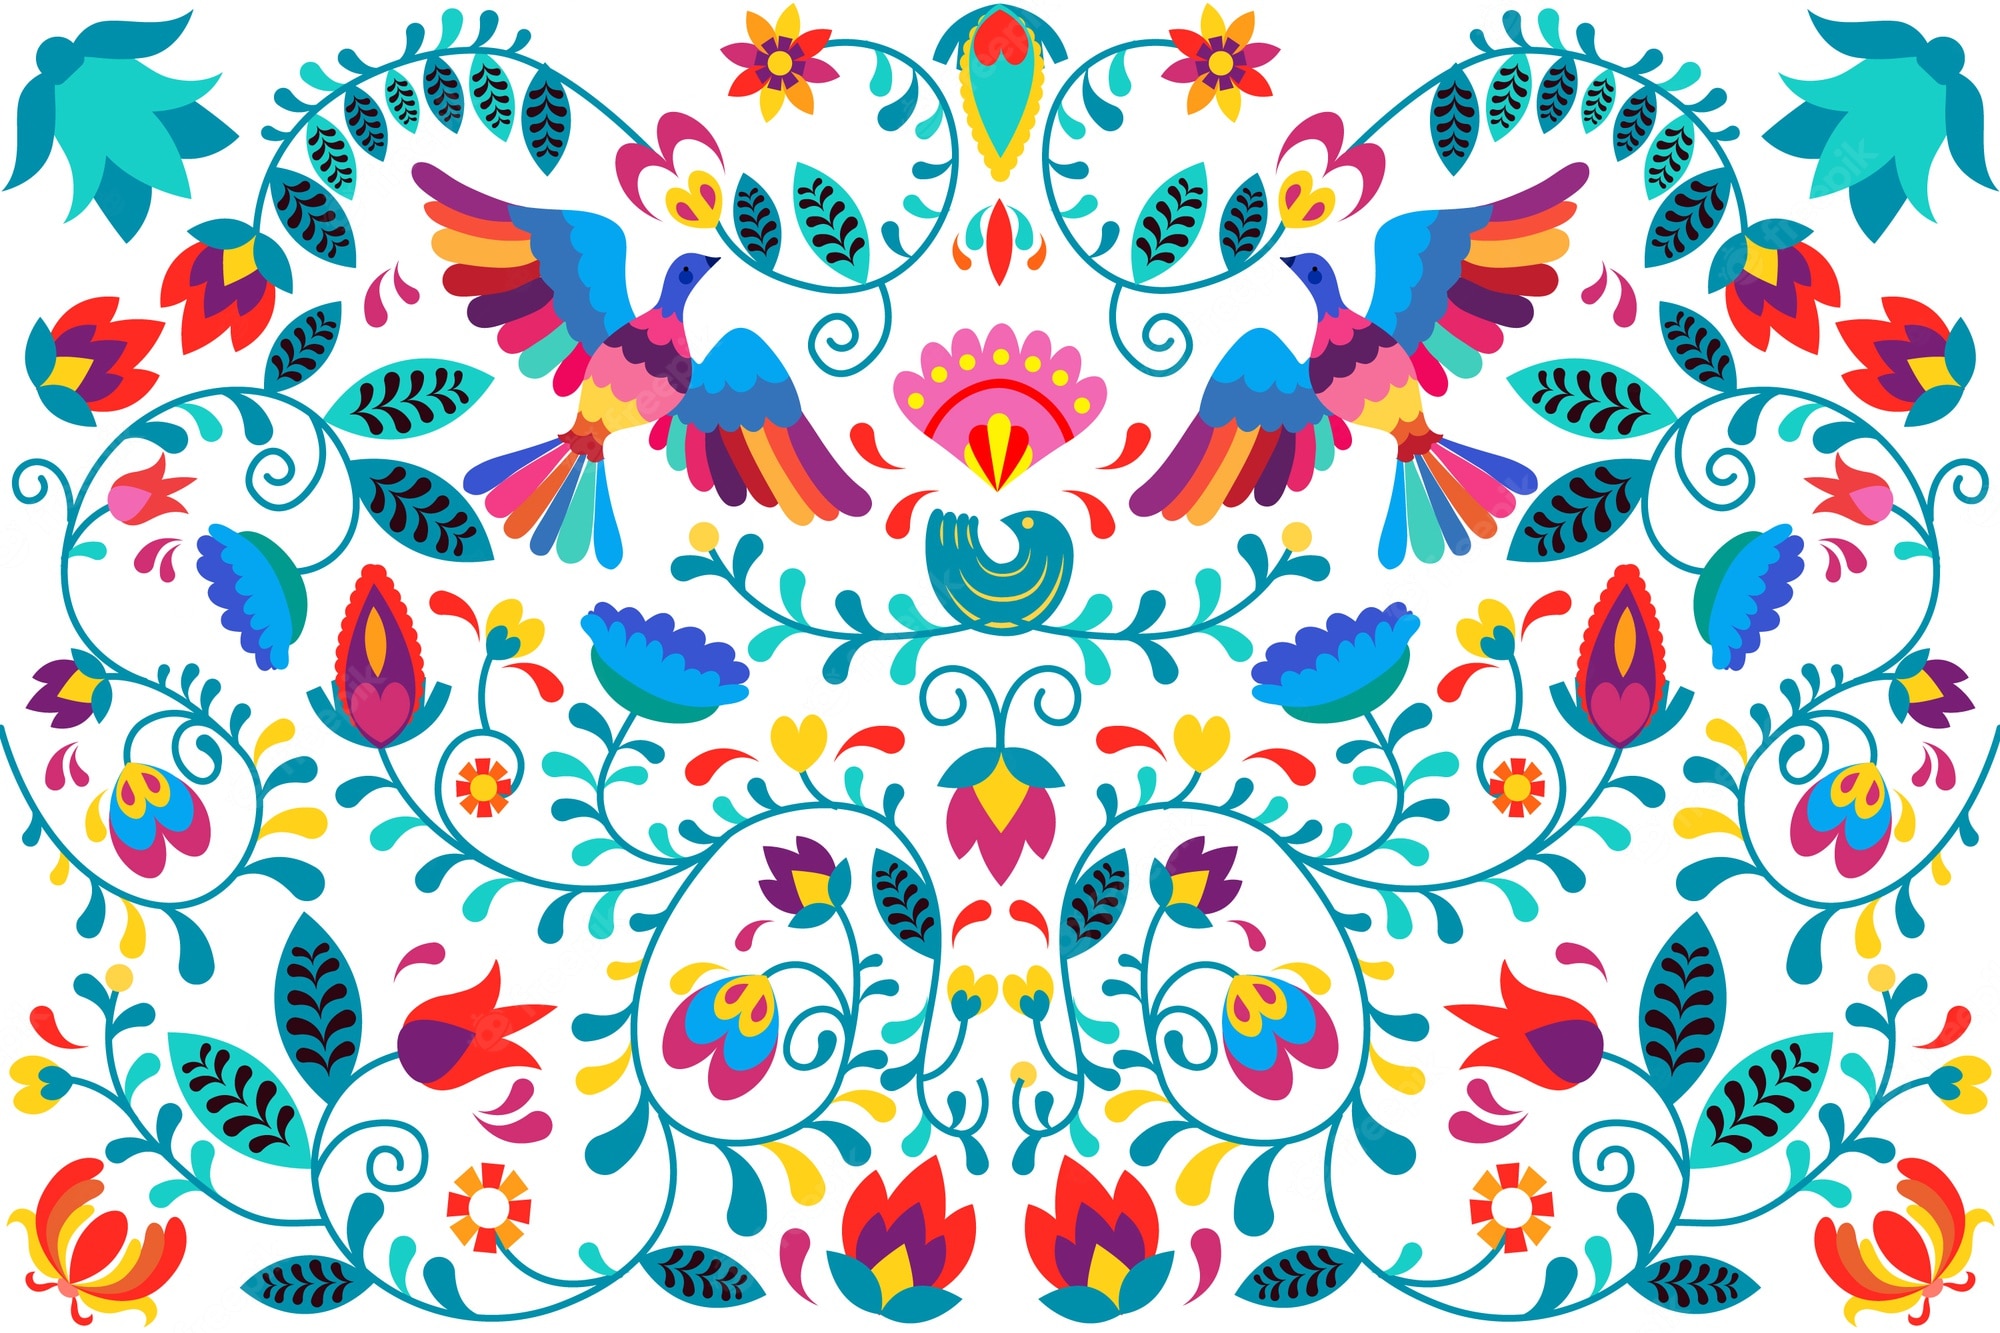 Colorful Mexican Background Image. Free Vectors, & PSD